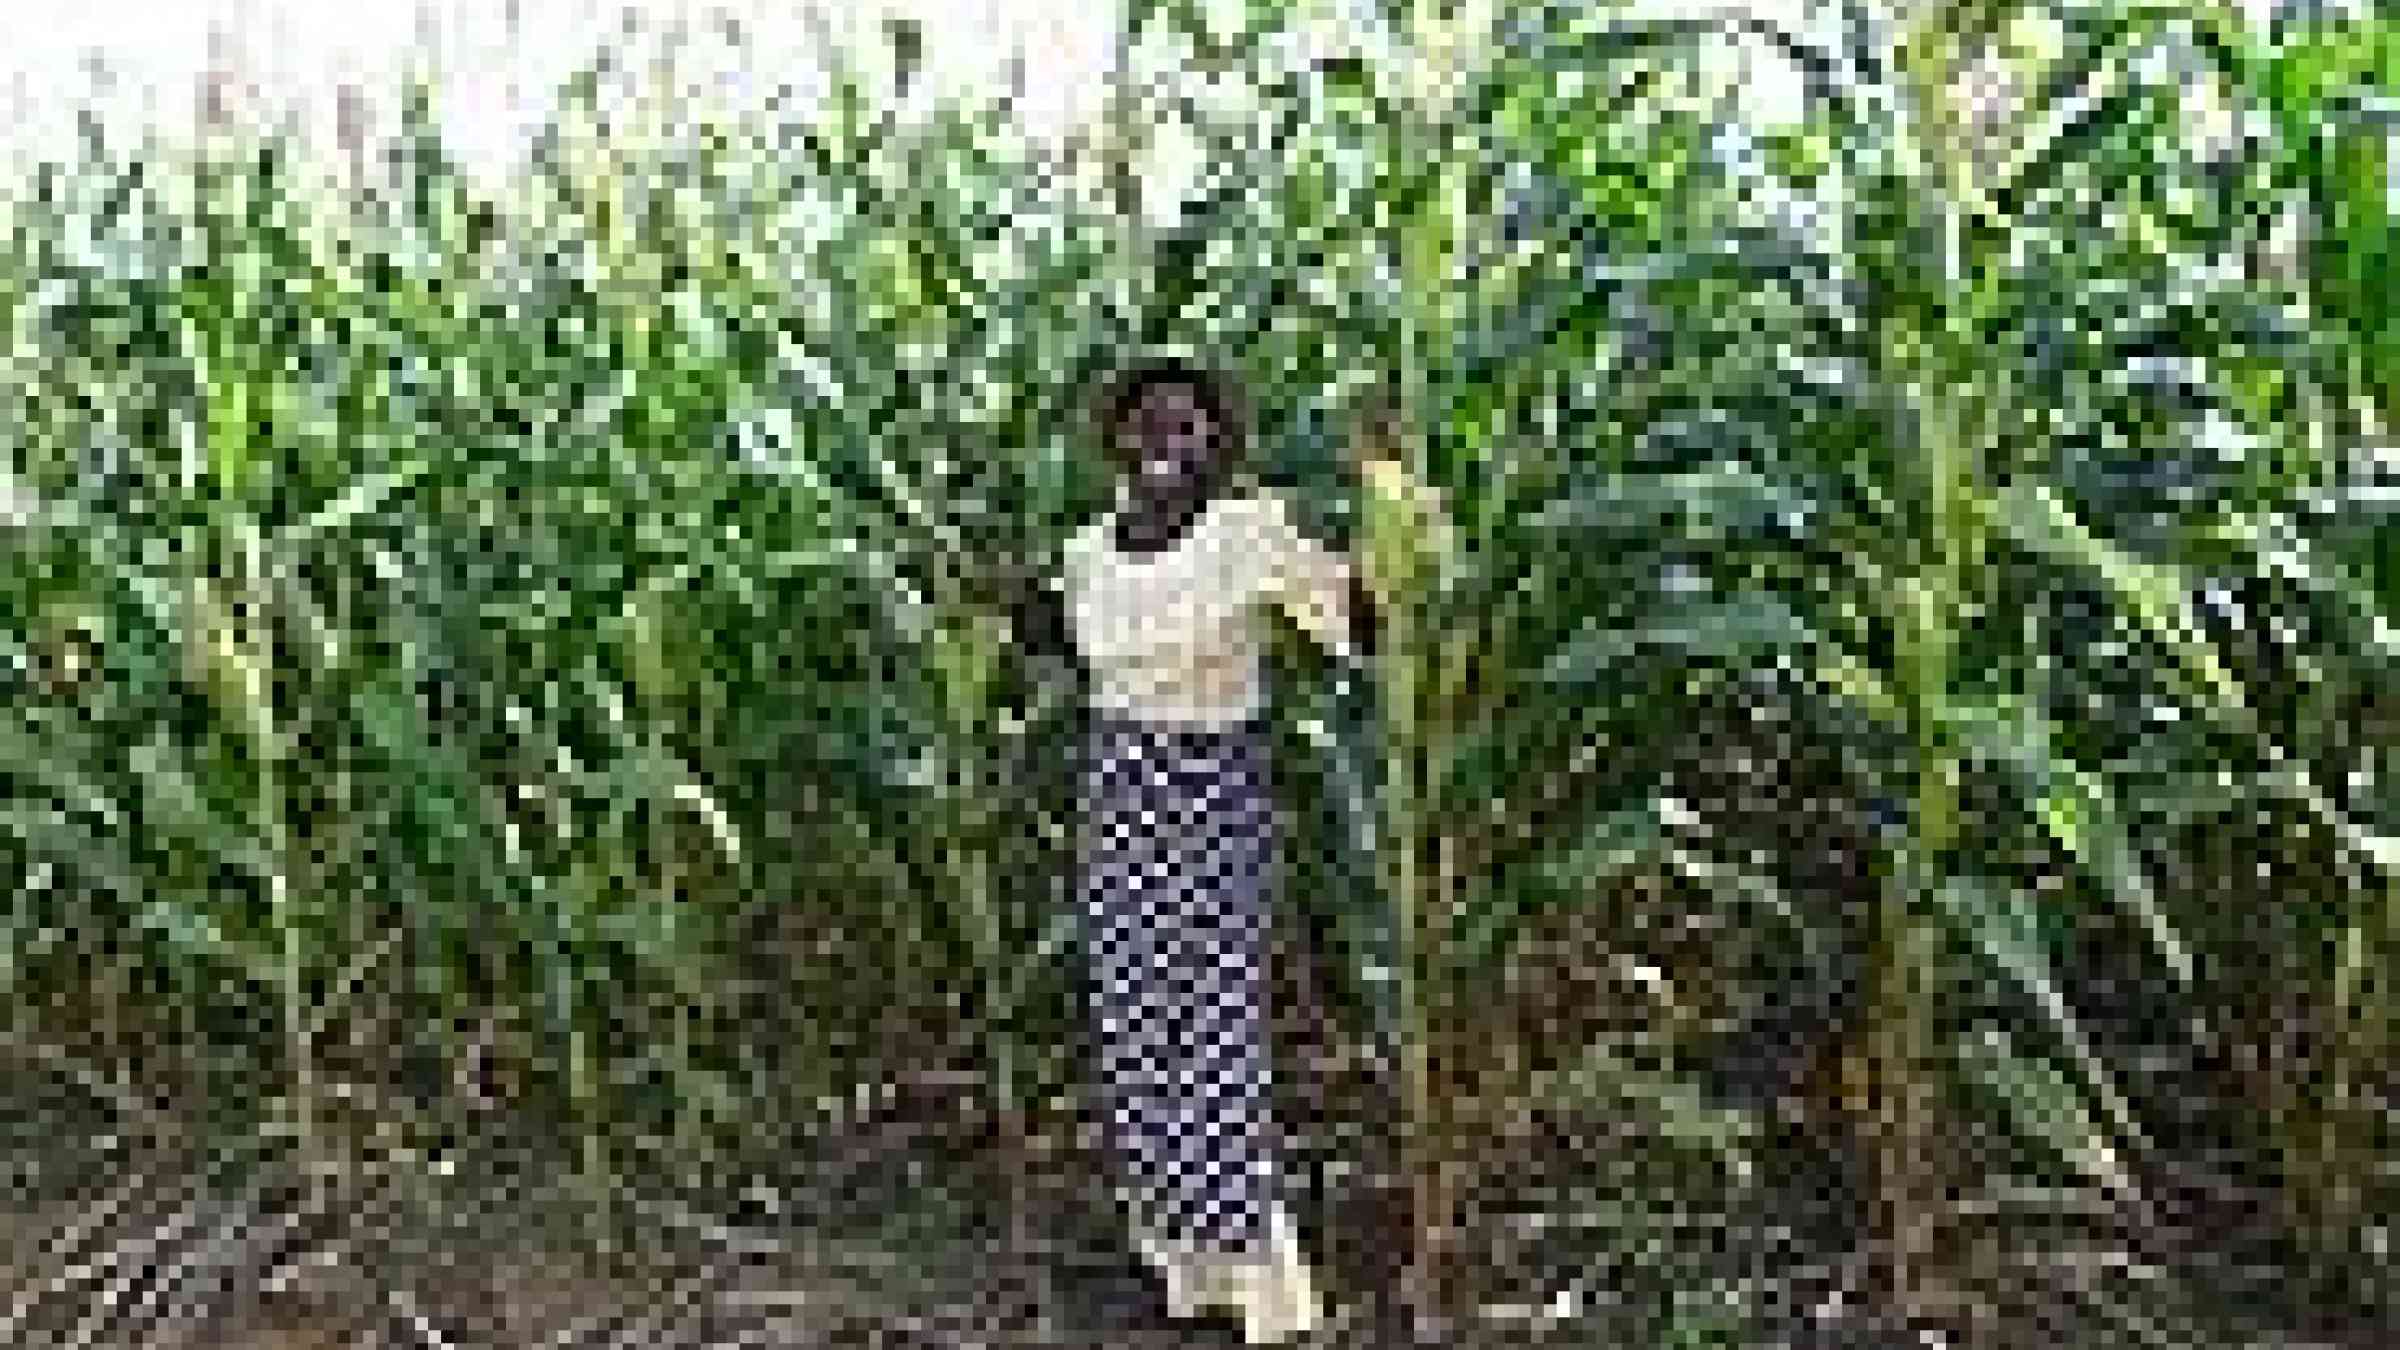 by Flickr user CIMMYT / International Maize and Wheat Improvement , Creative Commons BY-NC-SA 2.0, http://www.flickr.com/photos/cimmyt/5101030282/